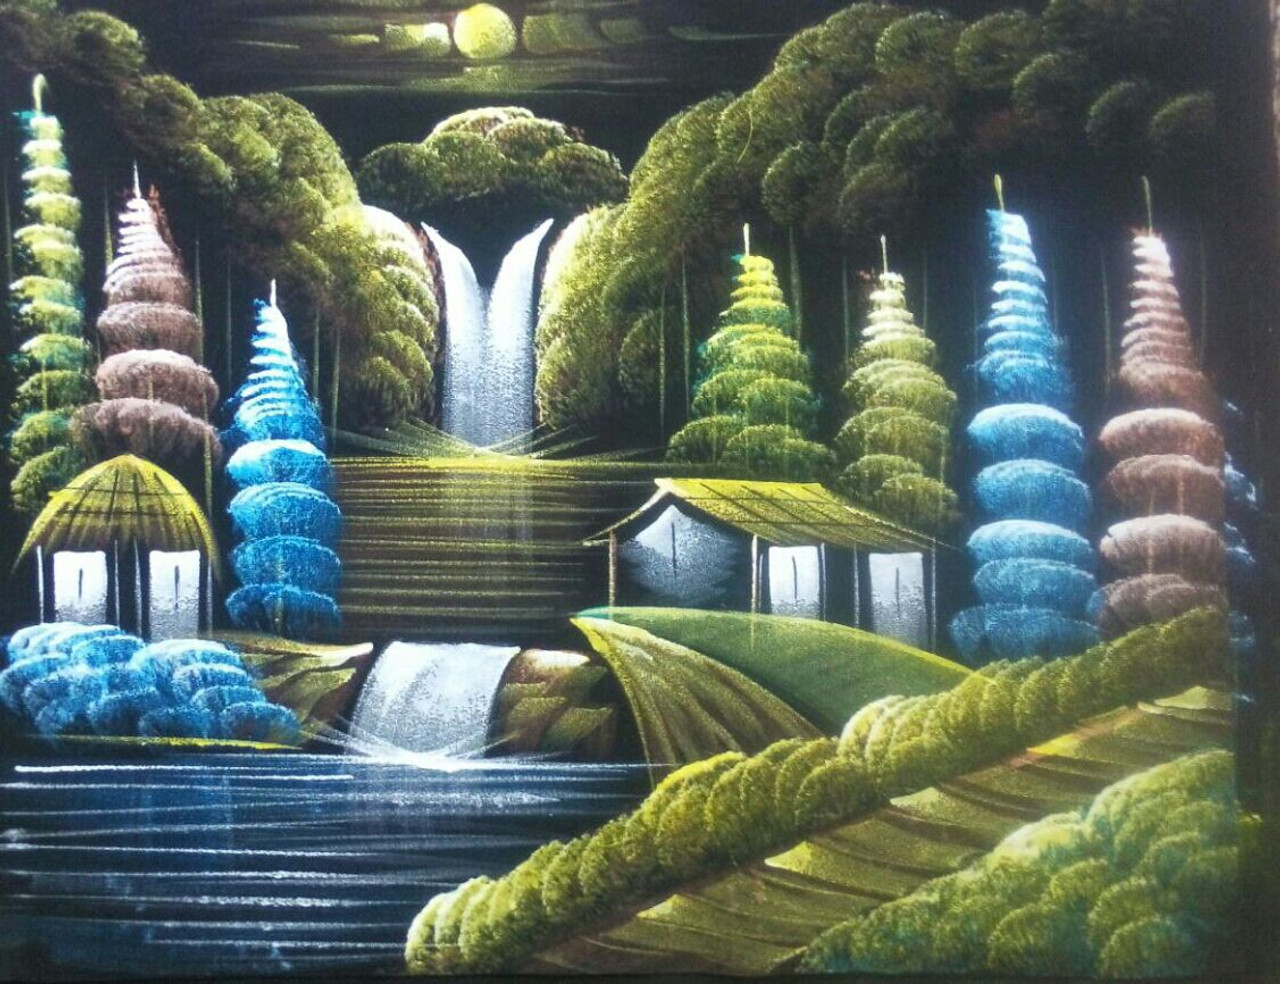 Buy Beautiful Scenery 13 by Community Artists Group@ Rs. 2790 ...